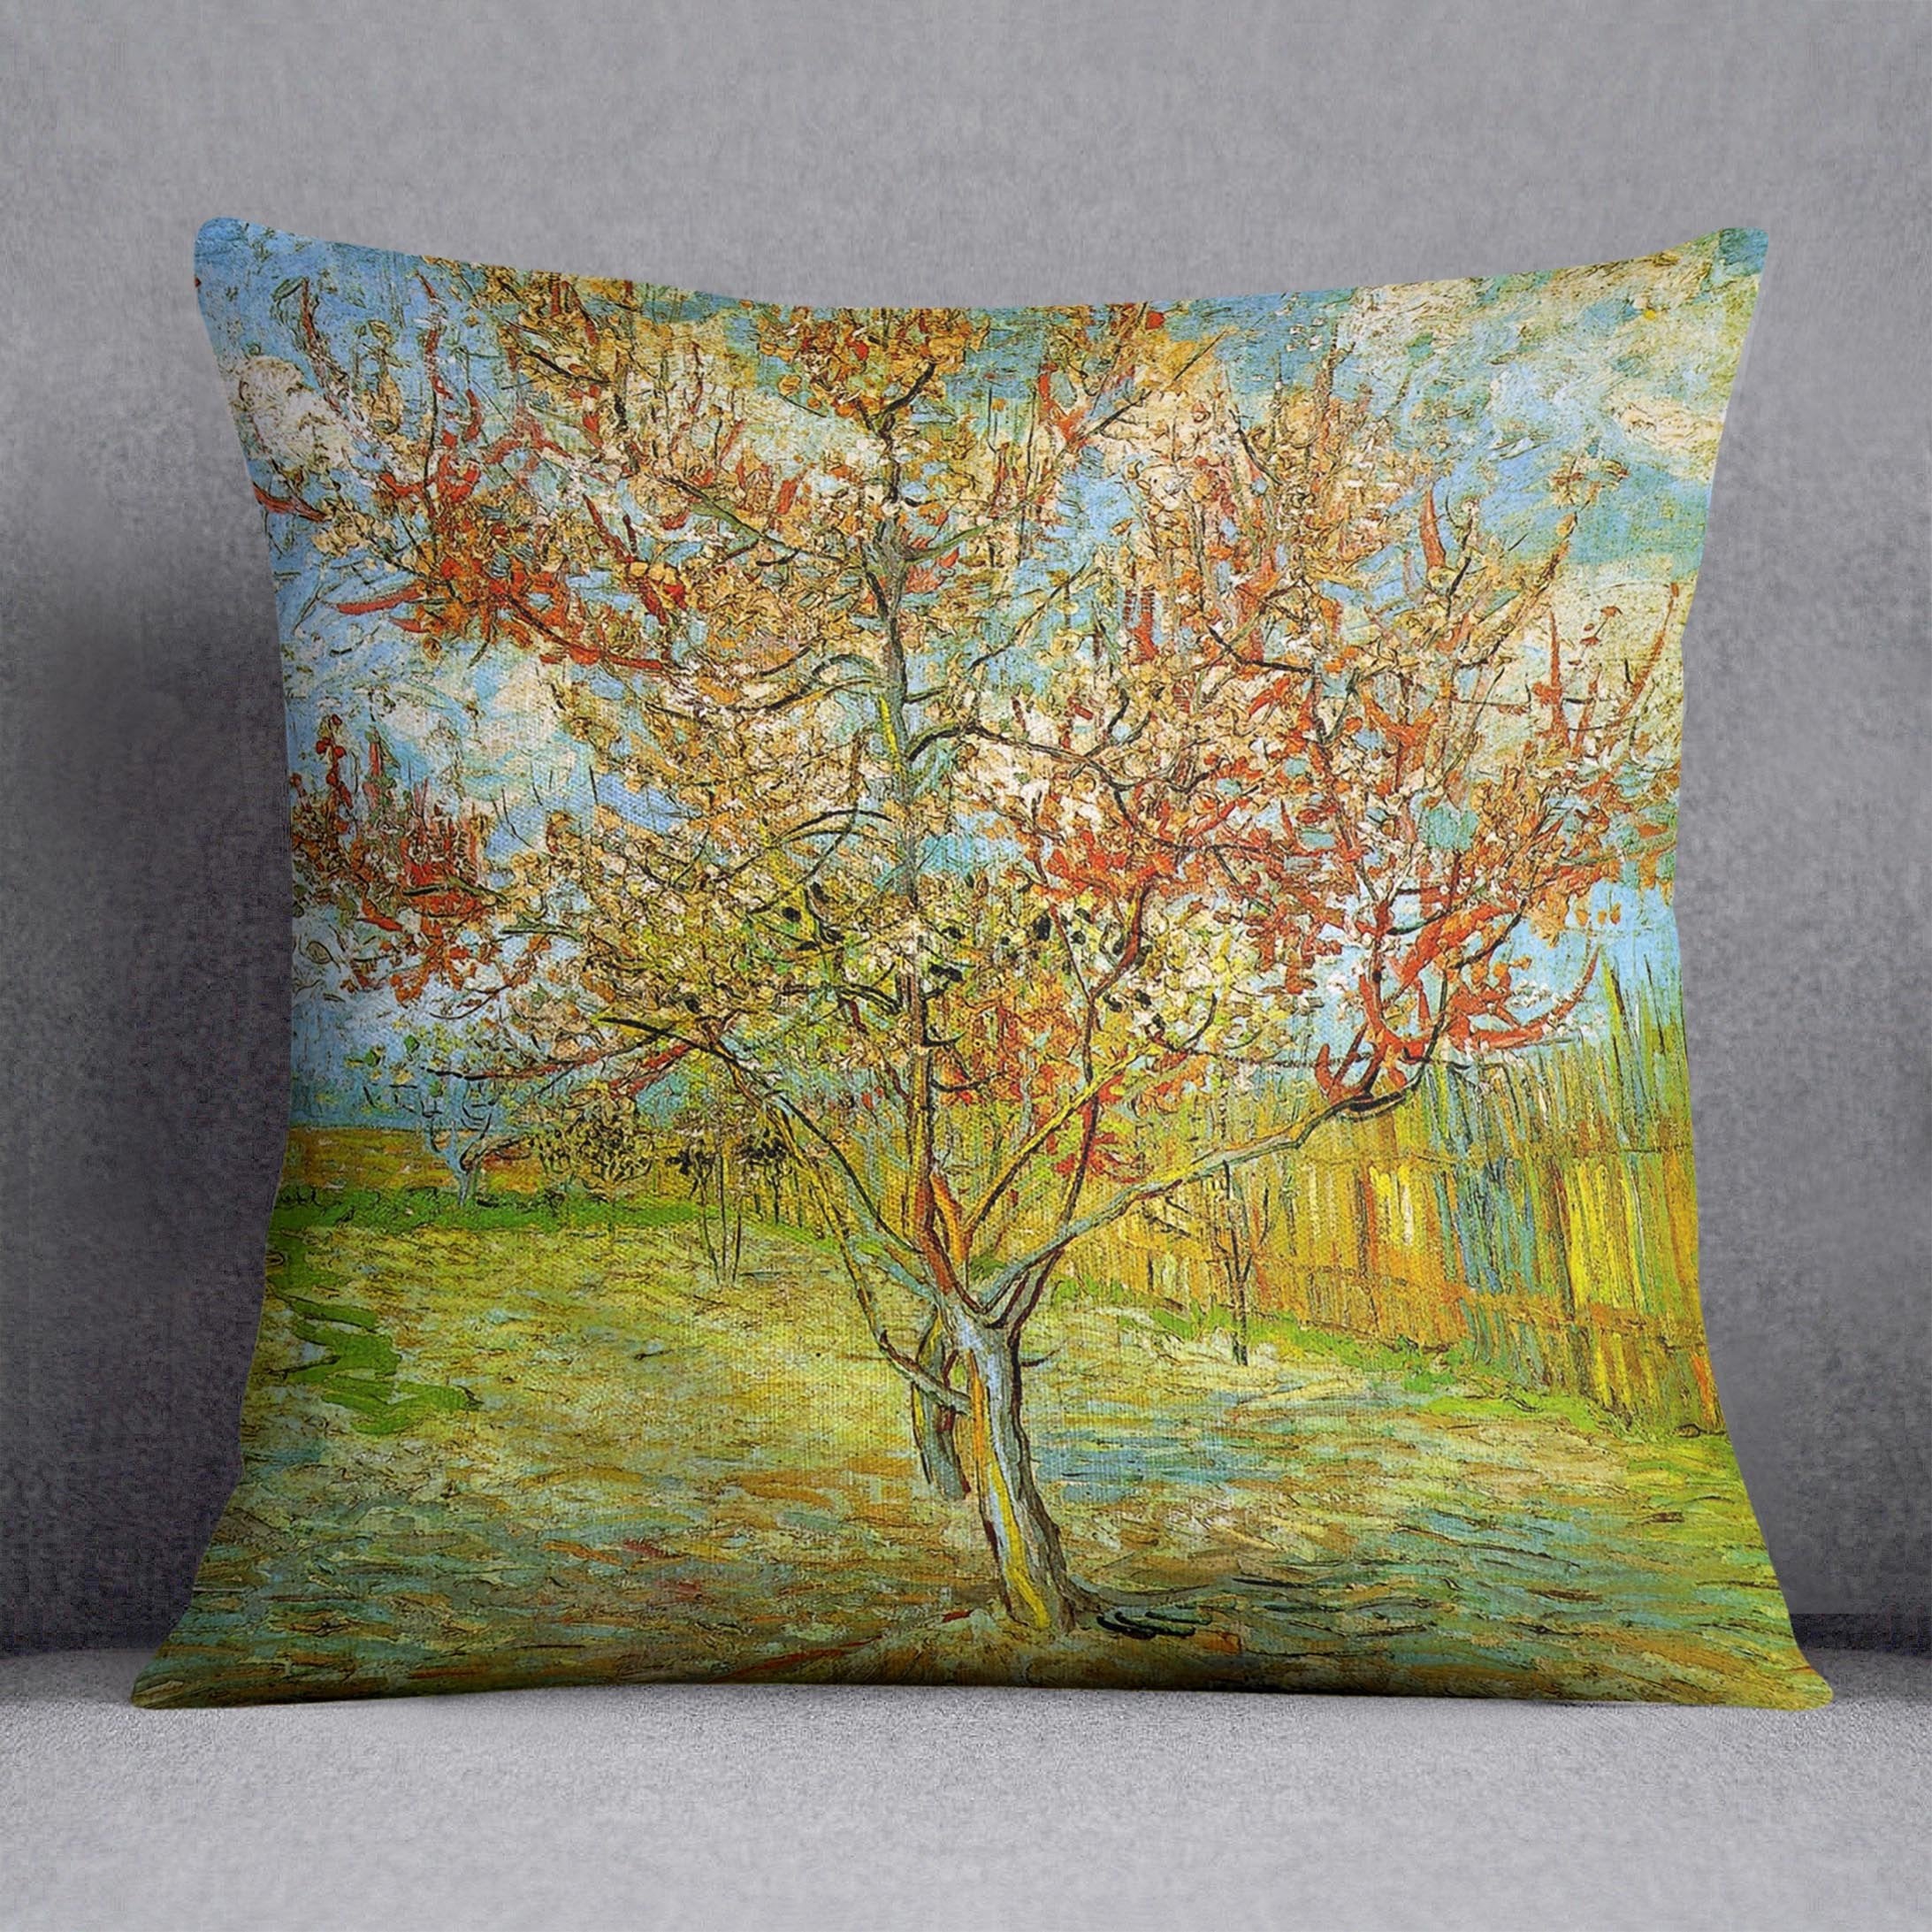 Pink Peach Tree in Blossom Reminiscence of Mauve by Van Gogh Throw Pillow